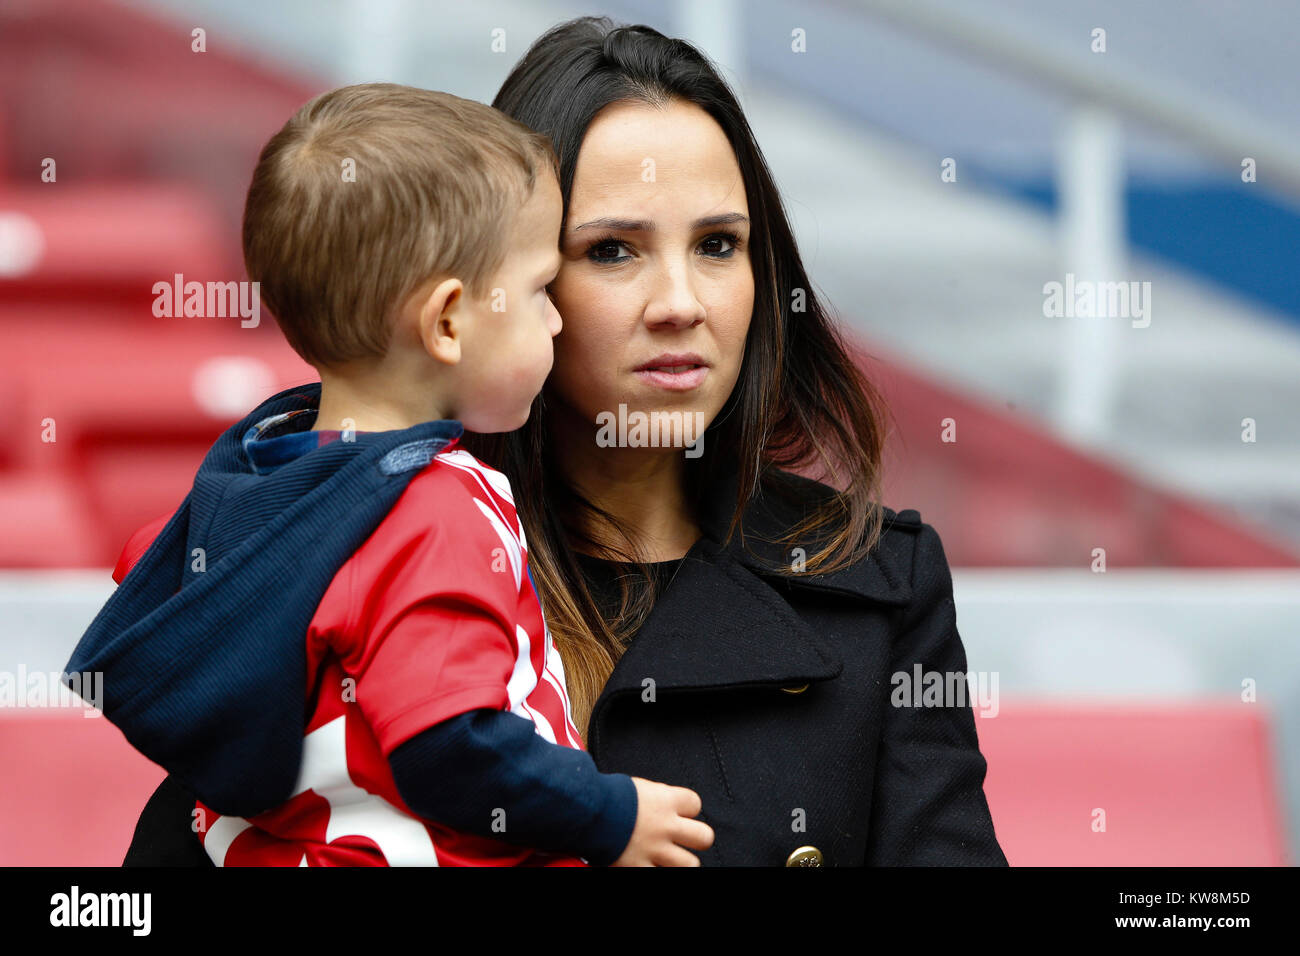 Madrid, Spain. 31st December, 2017. The family of Vitolo during his presentation as a new player of Atletico de Madrid at the Wanda Metropolitano stadium in Madrid, Spain, December 31, 2017 . Credit: Gtres Información más Comuniación on line, S.L./Alamy Live News Stock Photo